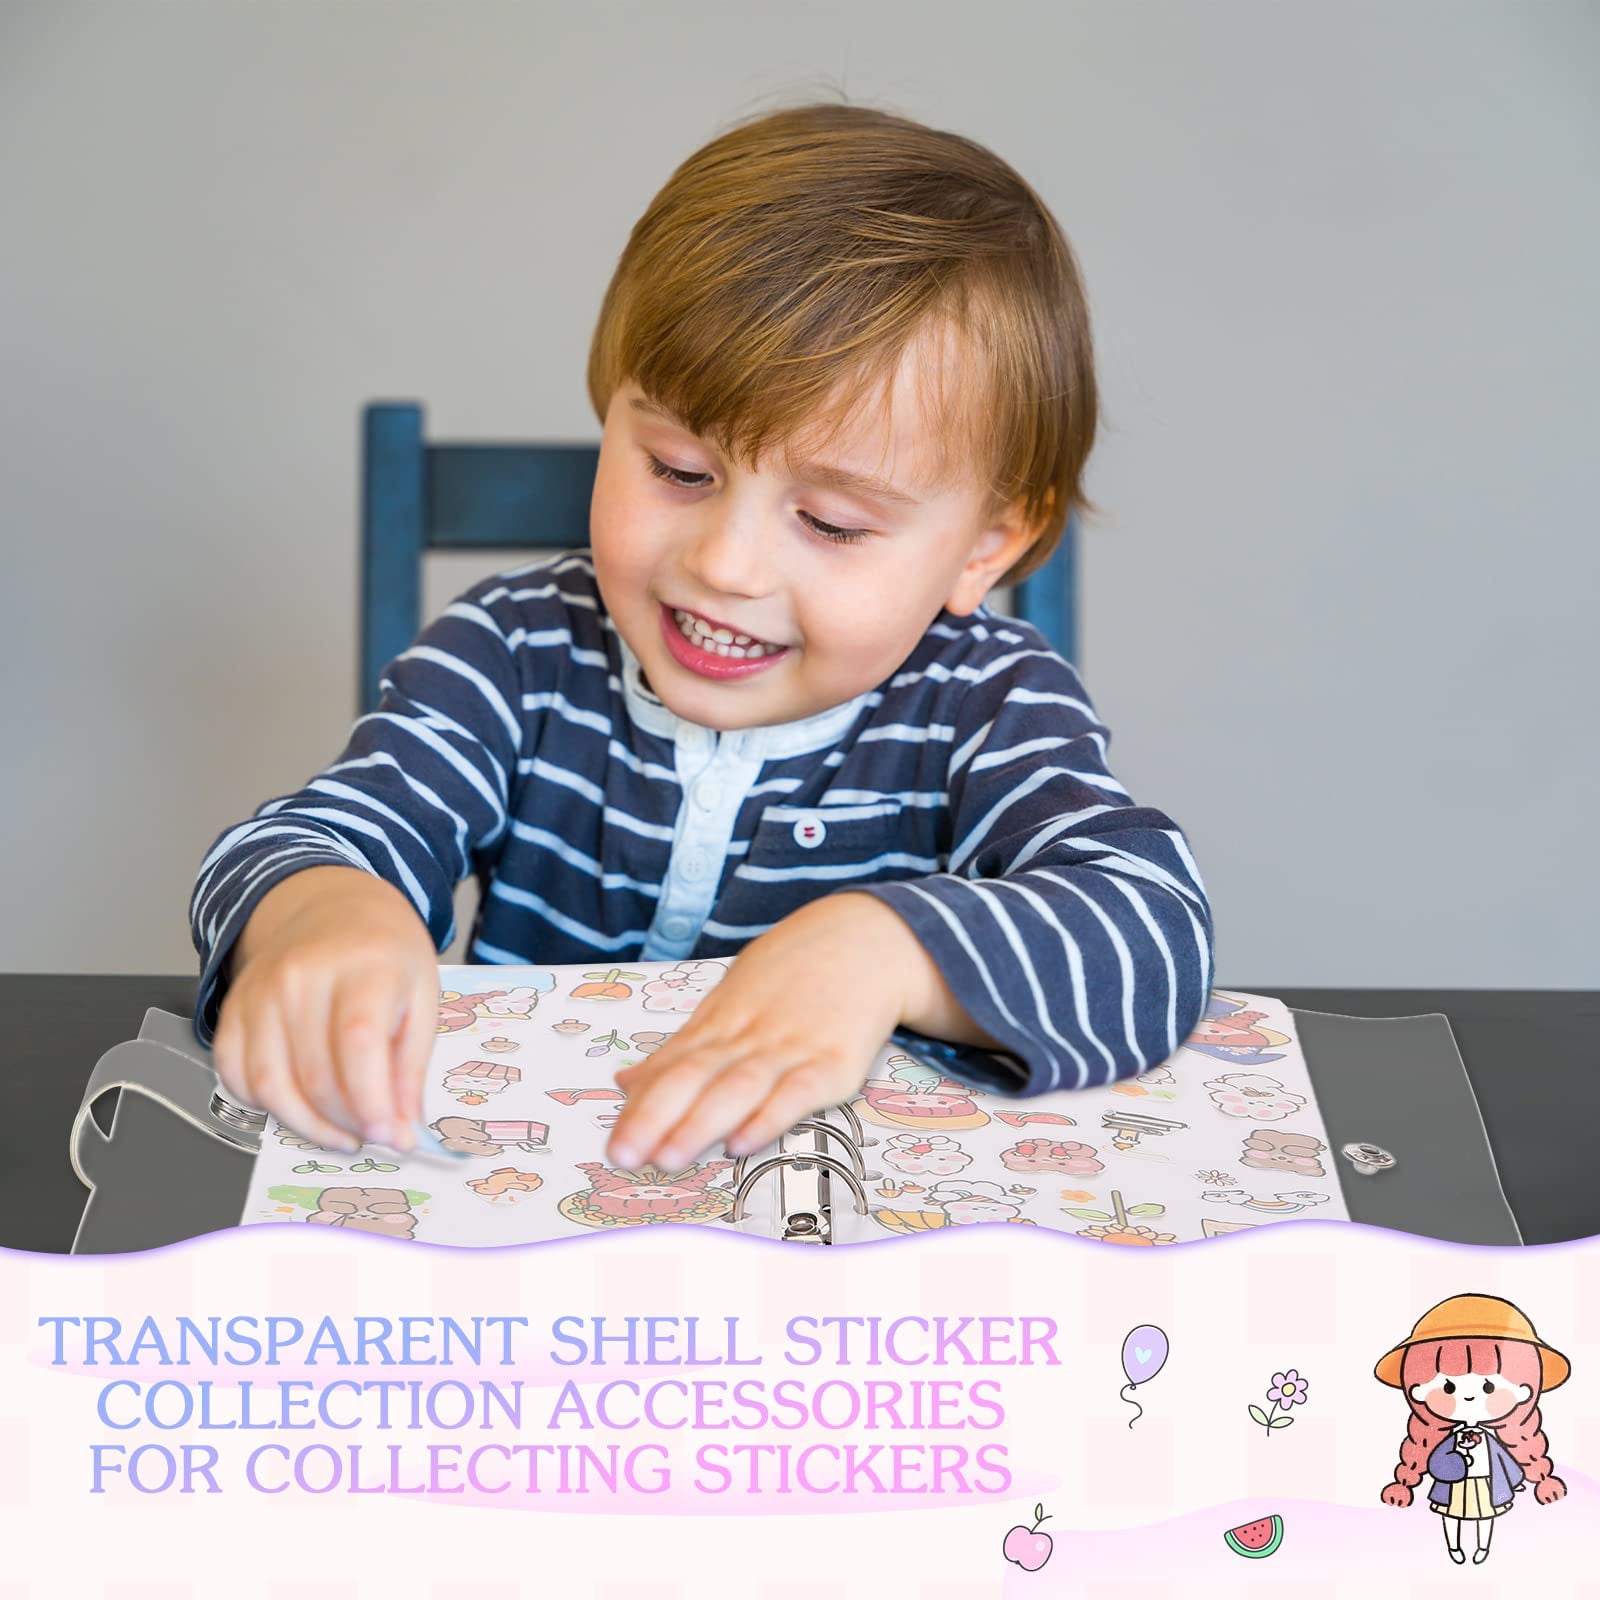 my sticker collecting album removable: blank sticker book collecting album  reusable, sticker collecting album blank, sticker album for collecting